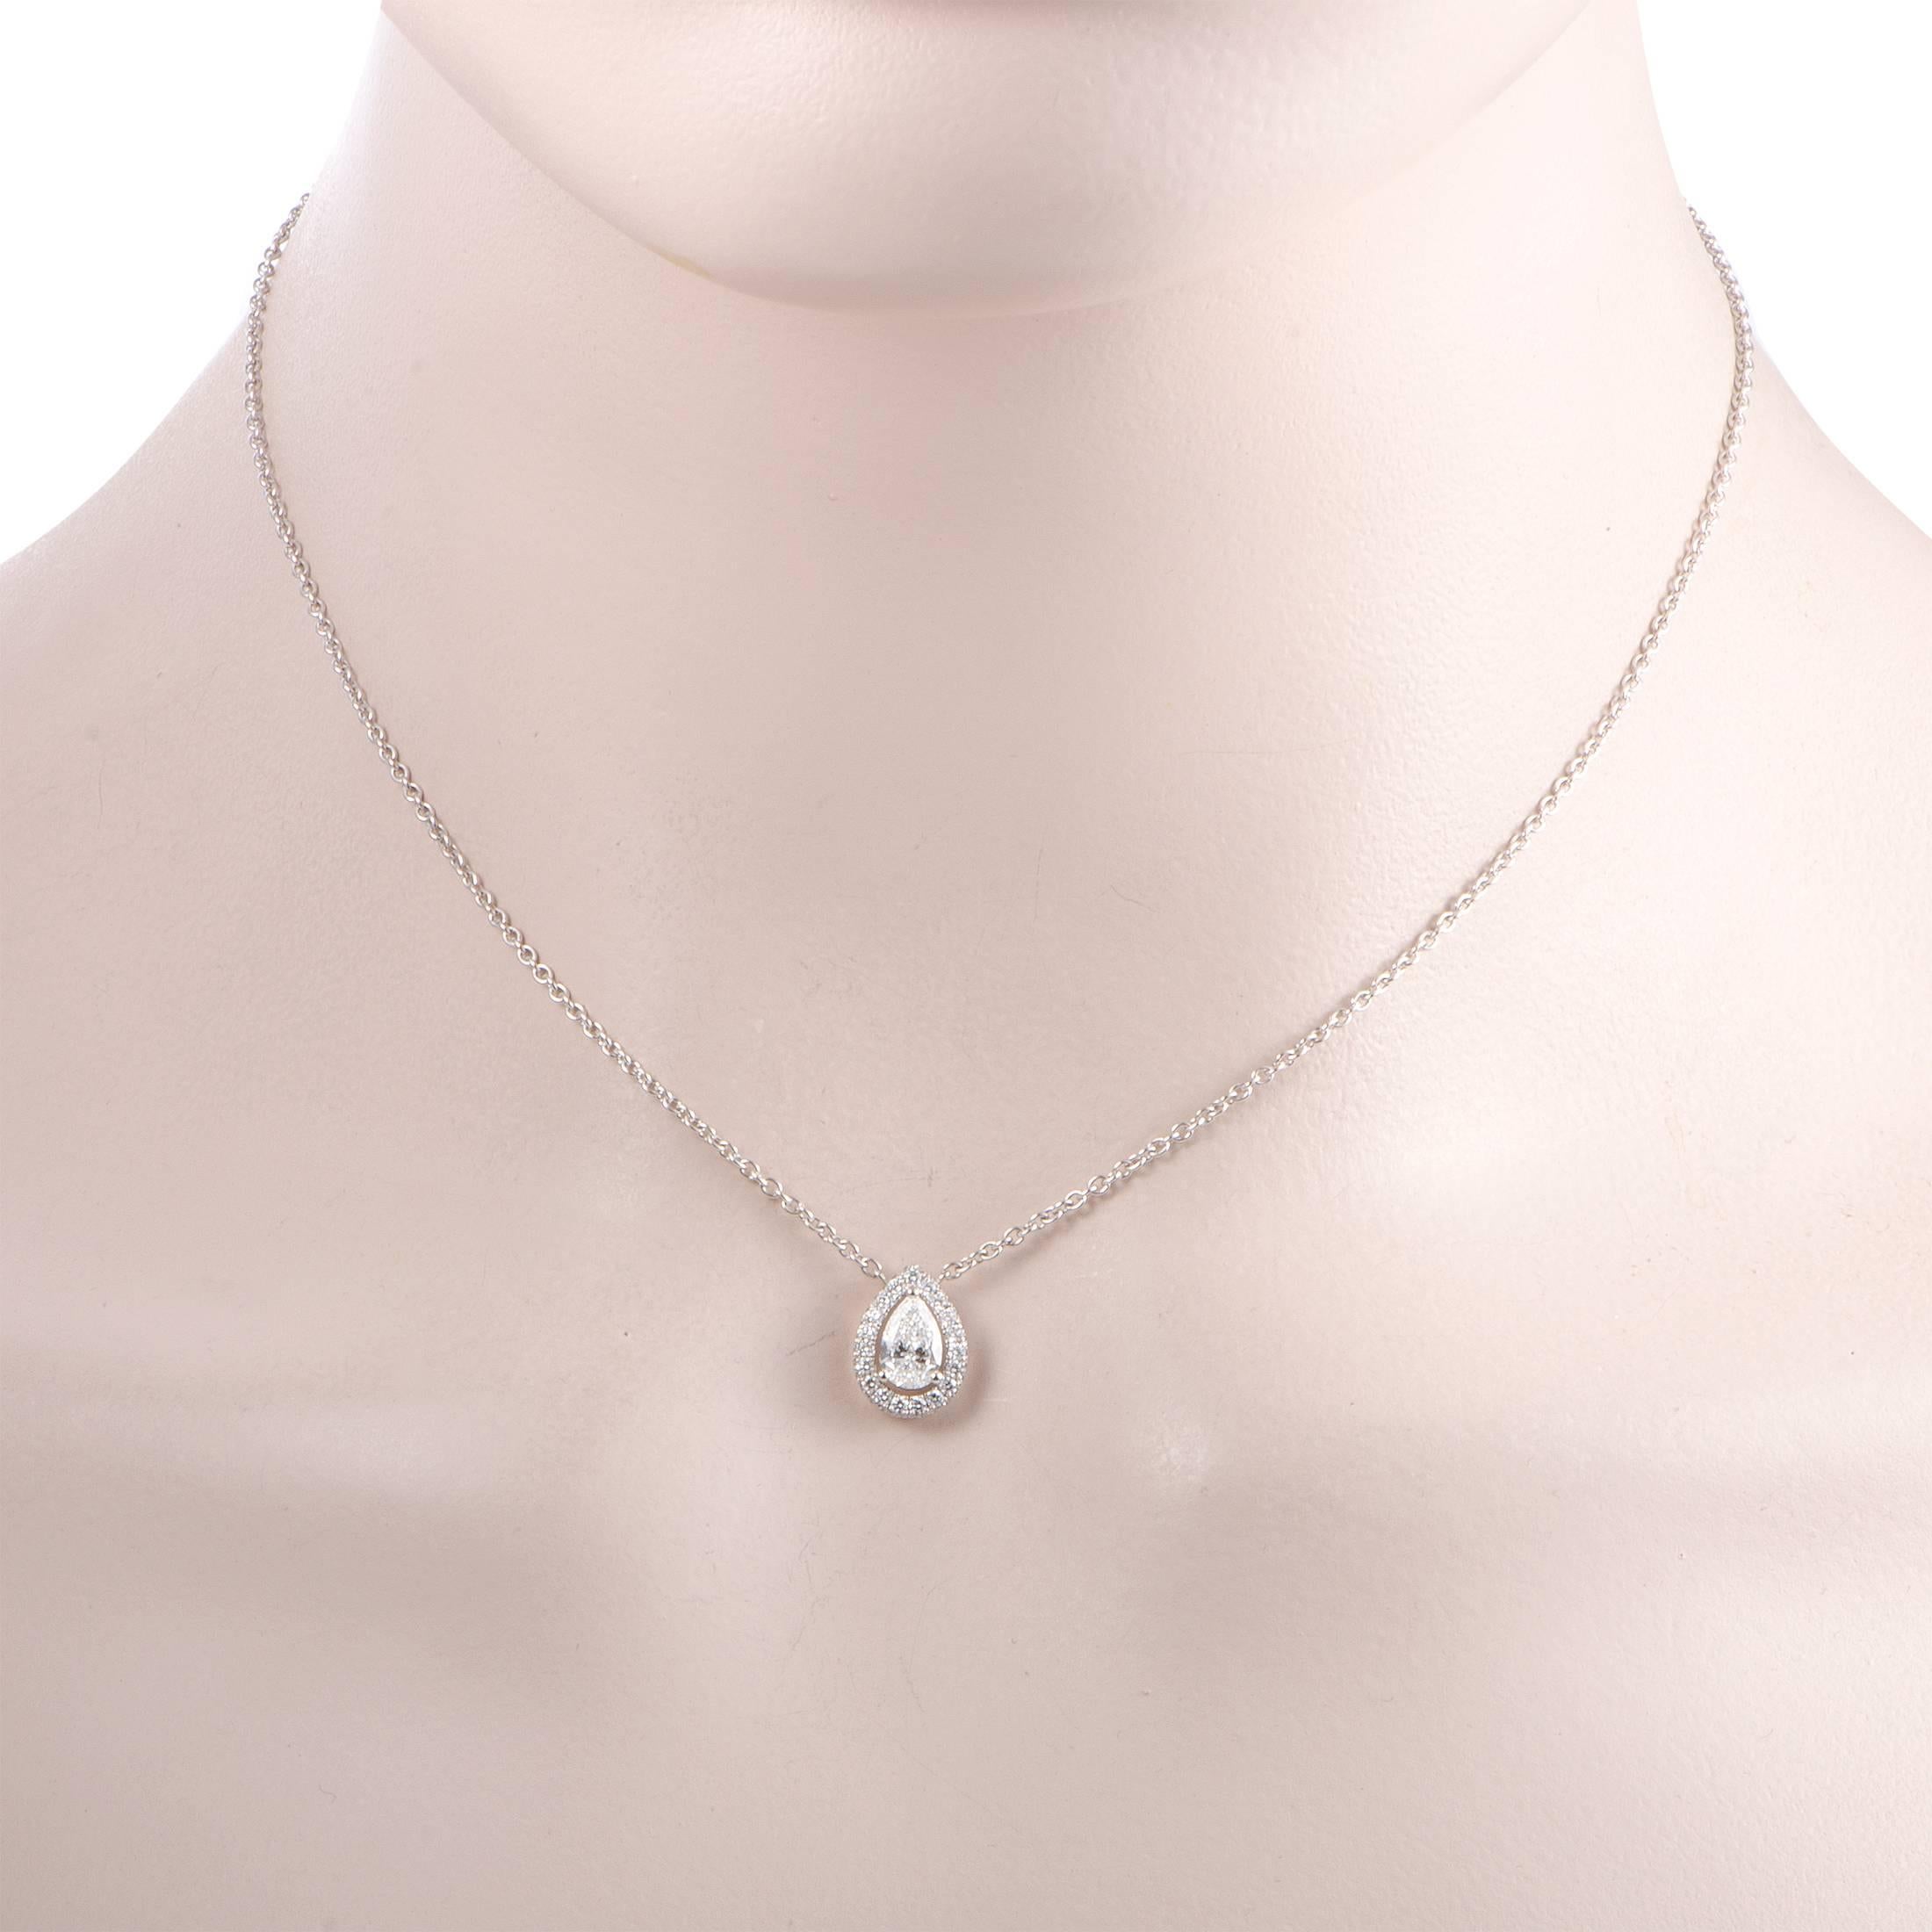 Understated elegance and classic allure are embodied in this splendid design from Graff that offers a look of utmost prestige and sophistication. Made of 18K white gold, the necklace features a pendant set with a colorless (grade F) diamond of VVS2